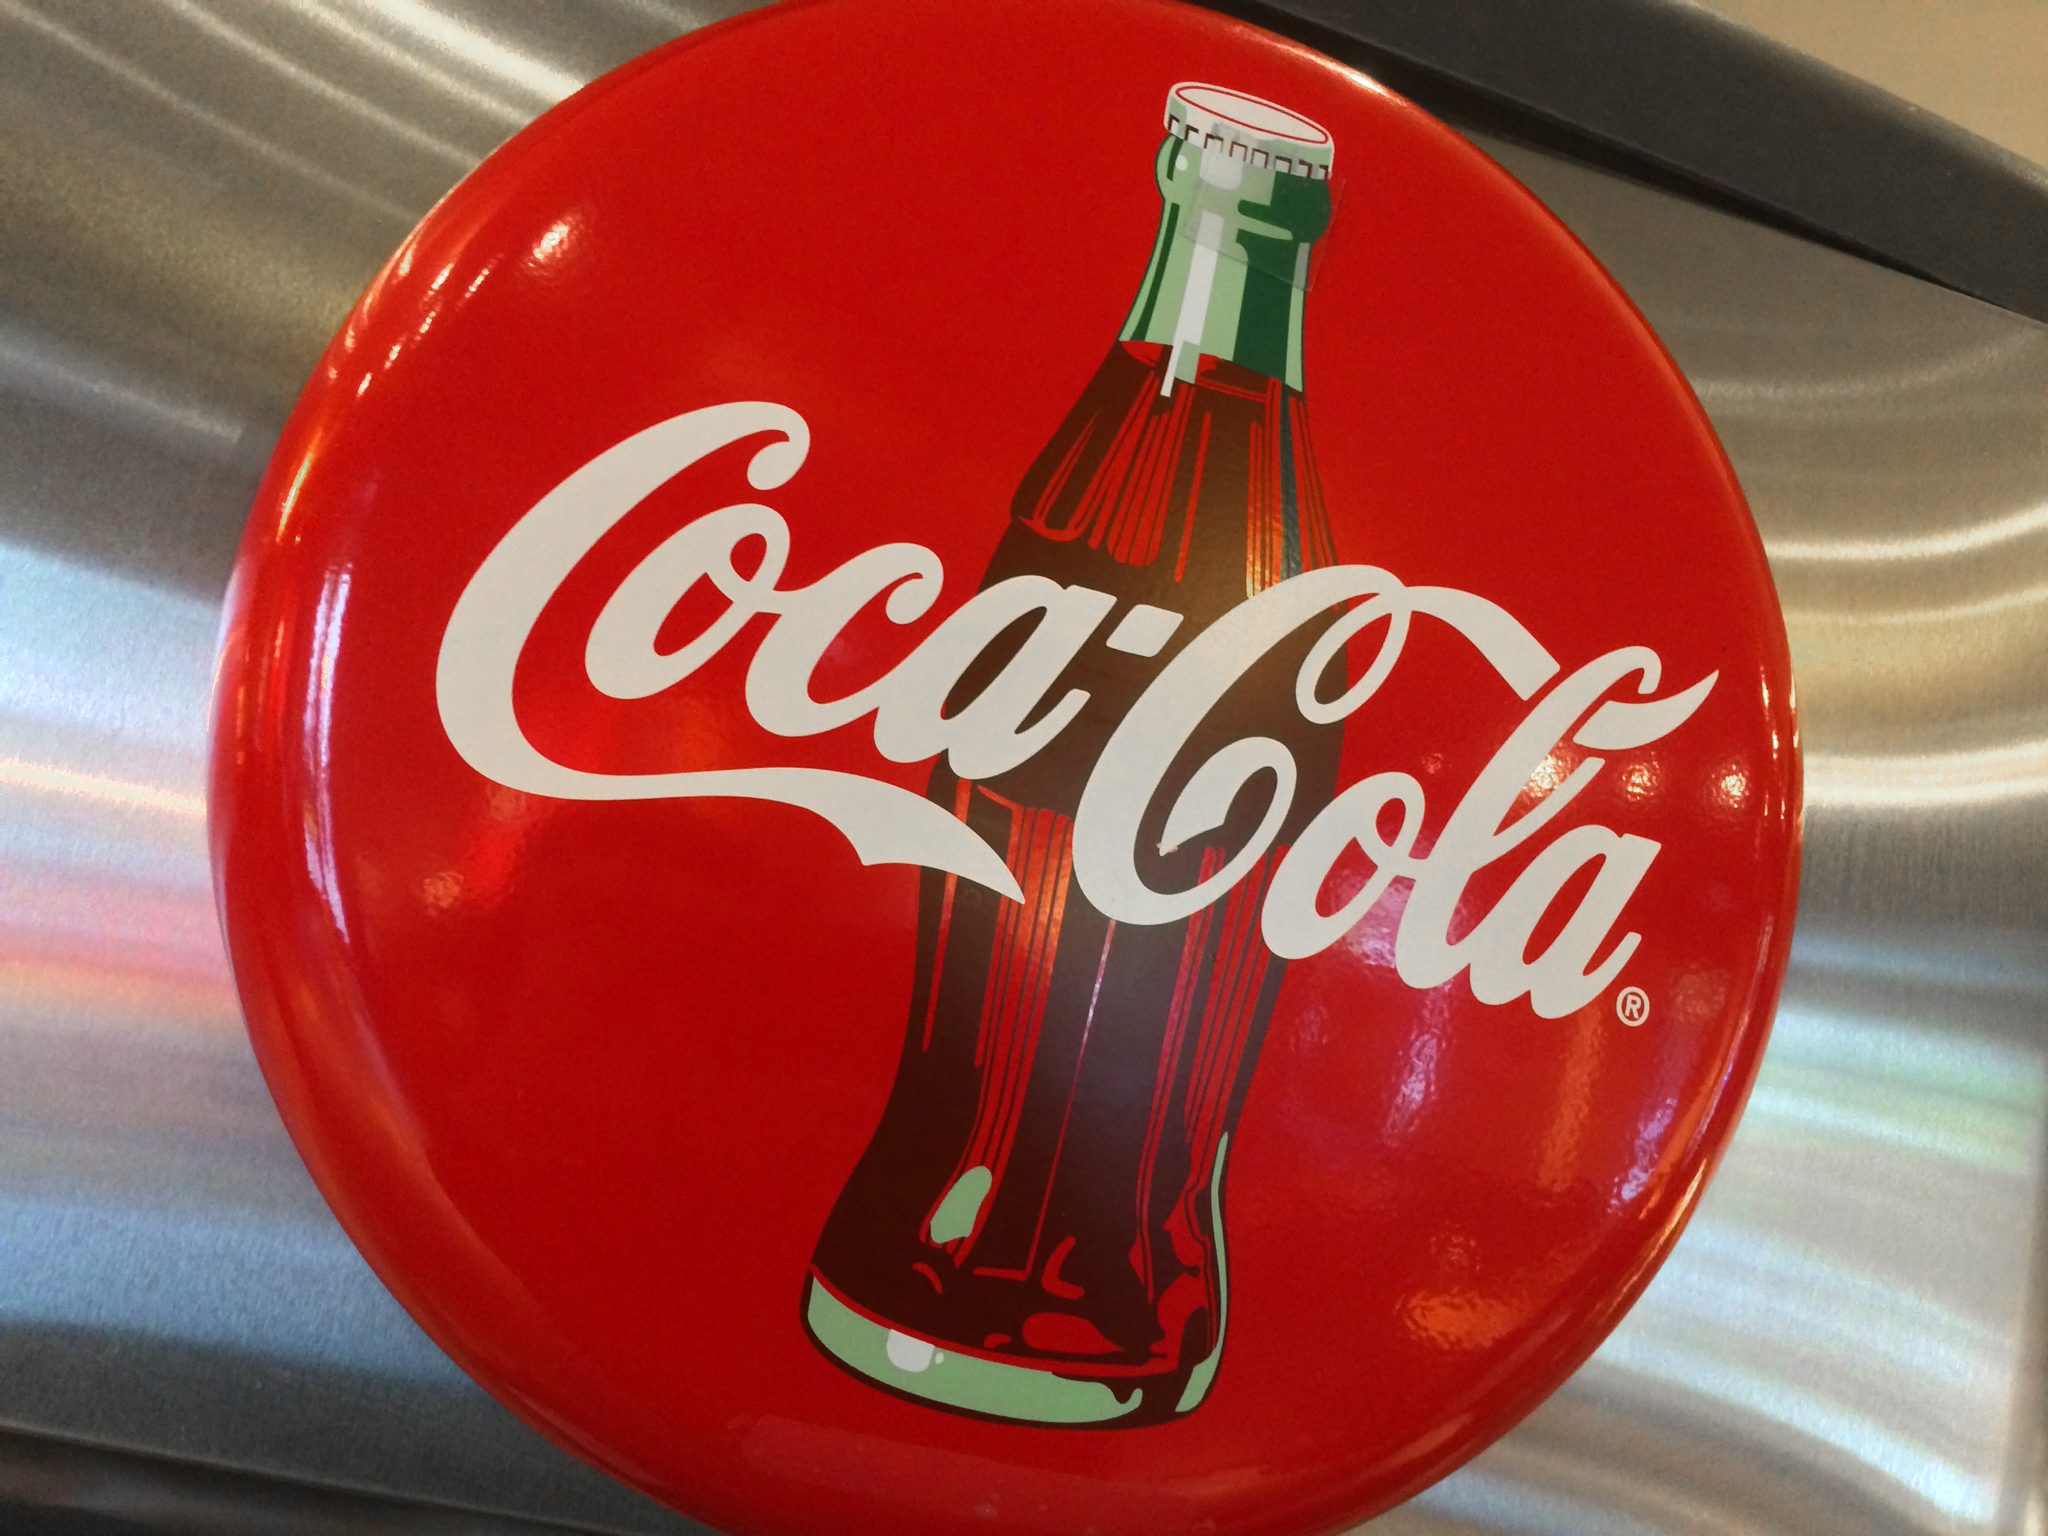 (FILES) This file photo taken on May 1, 2016 shows a Coca-Cola logo in a restaurant in Washington, DC. Coca-Cola said February 9, 2017 the strong US dollar again hit results in some overseas markets, leading to lower fourth-quarter earnings, although it scored higher revenues in North America.The soft drink giant said net income for the quarter ending December 31 fell to $550 million, down 55.5 percent from the final quarter of 2015, due in part to costs associated with the sale of the company's North American bottling operations to franchisers. / AFP PHOTO / Karen BLEIER